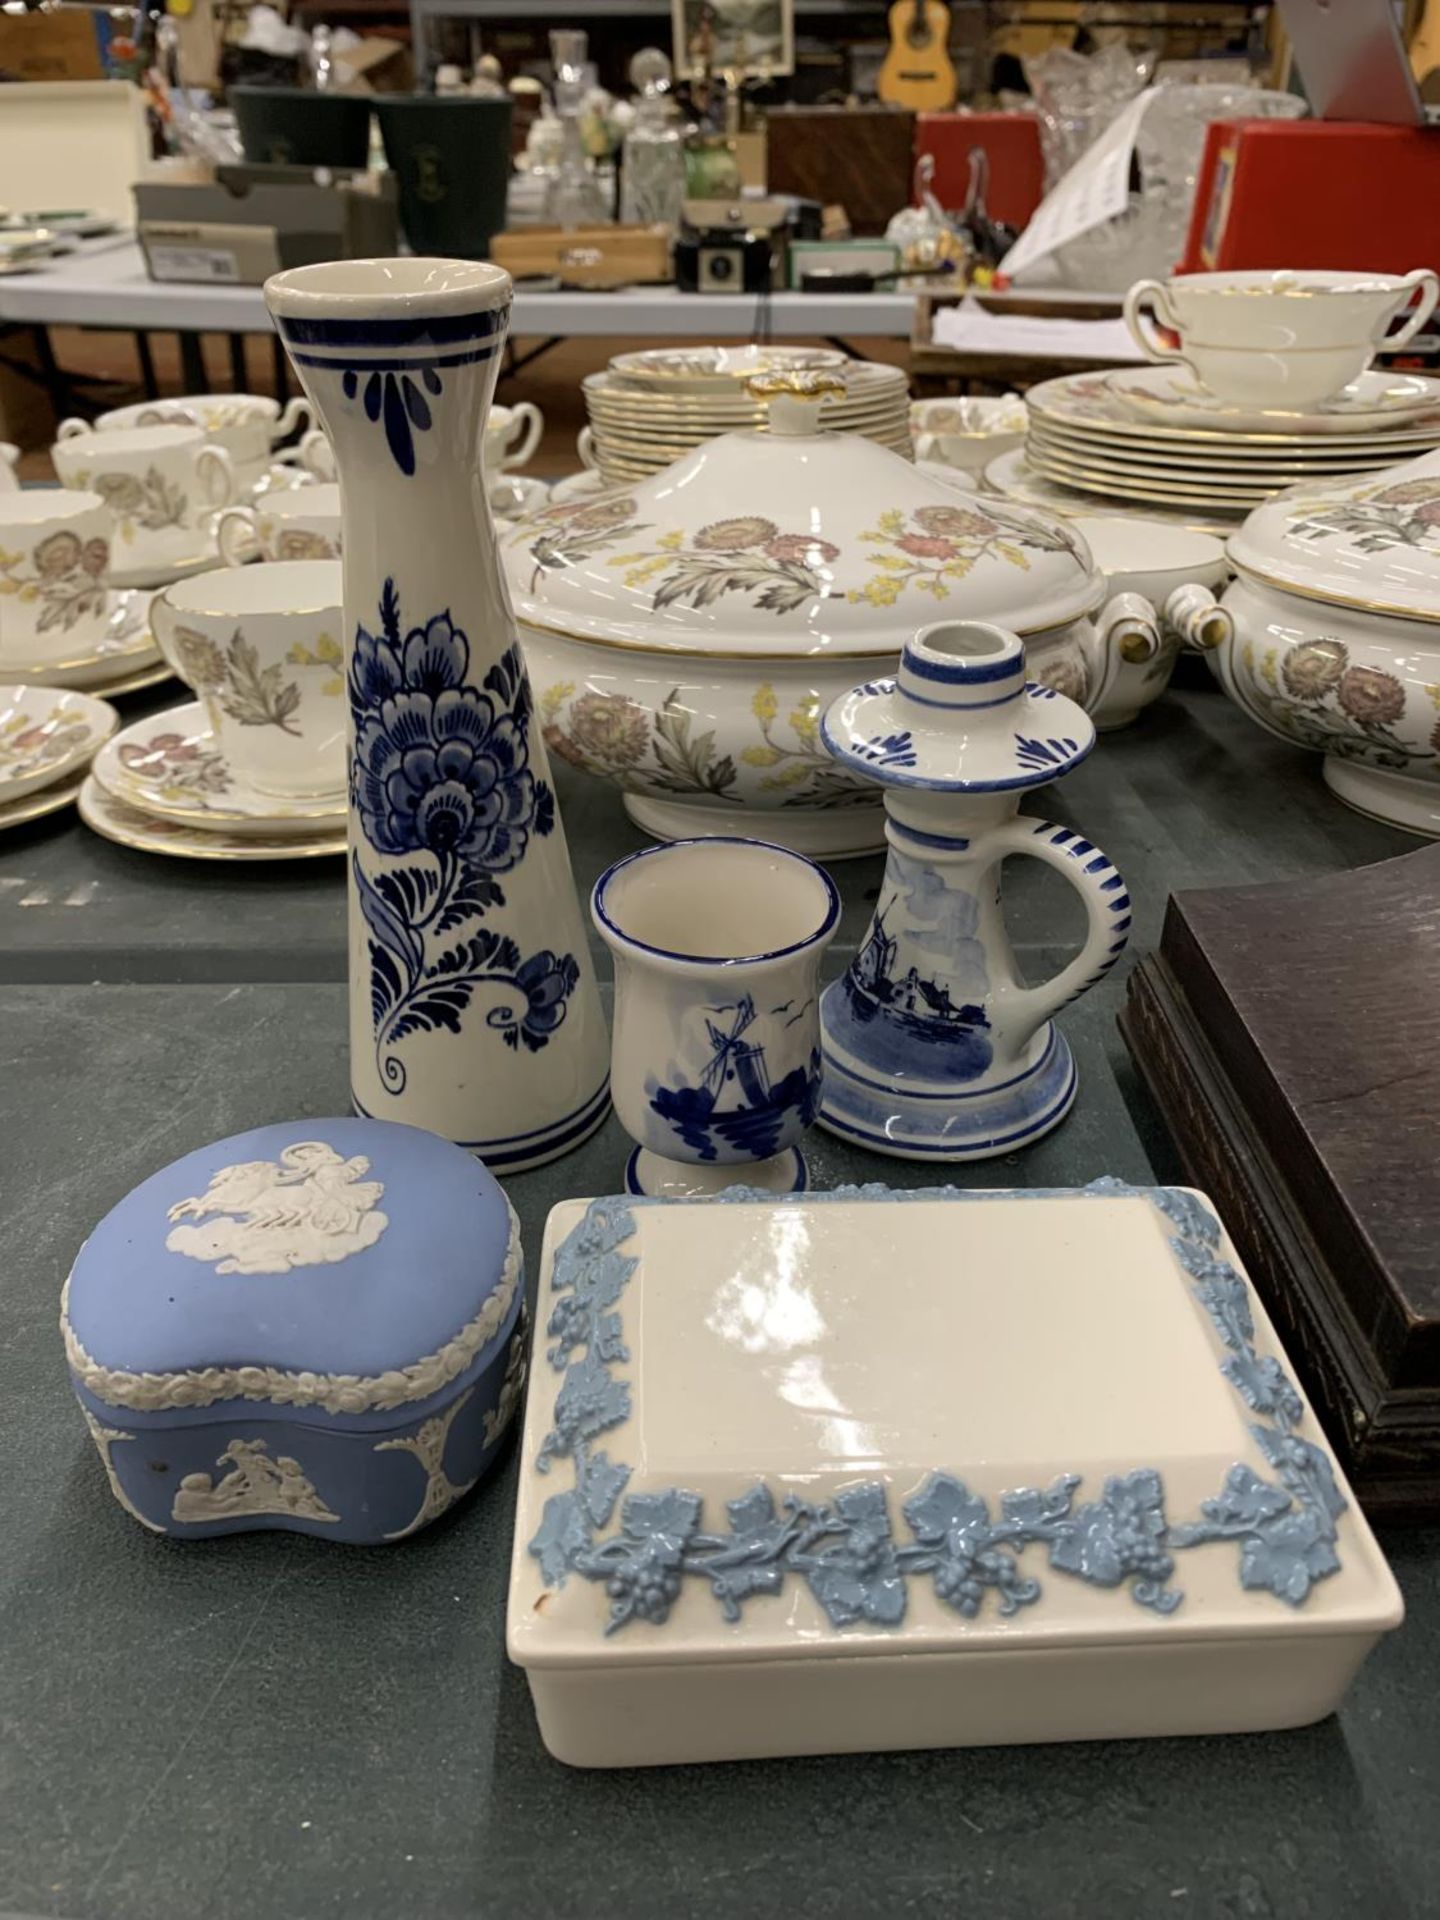 THREE PIECES OF DELFT BLUE AND WHITE POTTERY PLUS TWO PIECES OF WEDGWOOD